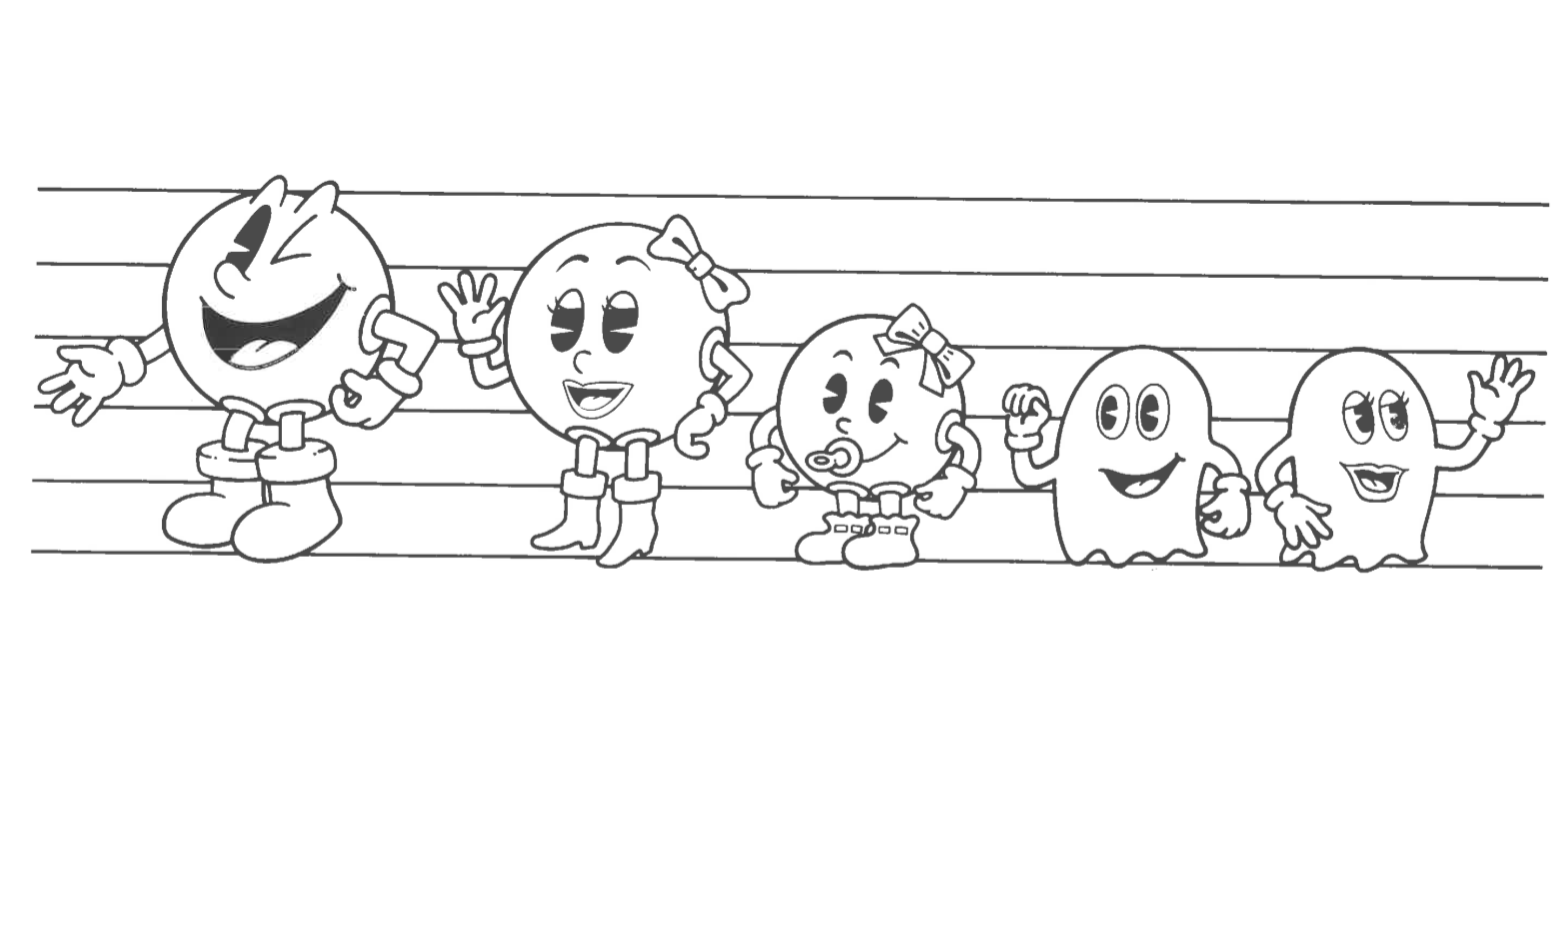 A height chart showing a cartoon lineup of Pac-Man, Ms. Pac-Man, Pac-Baby, Blinky and Sue